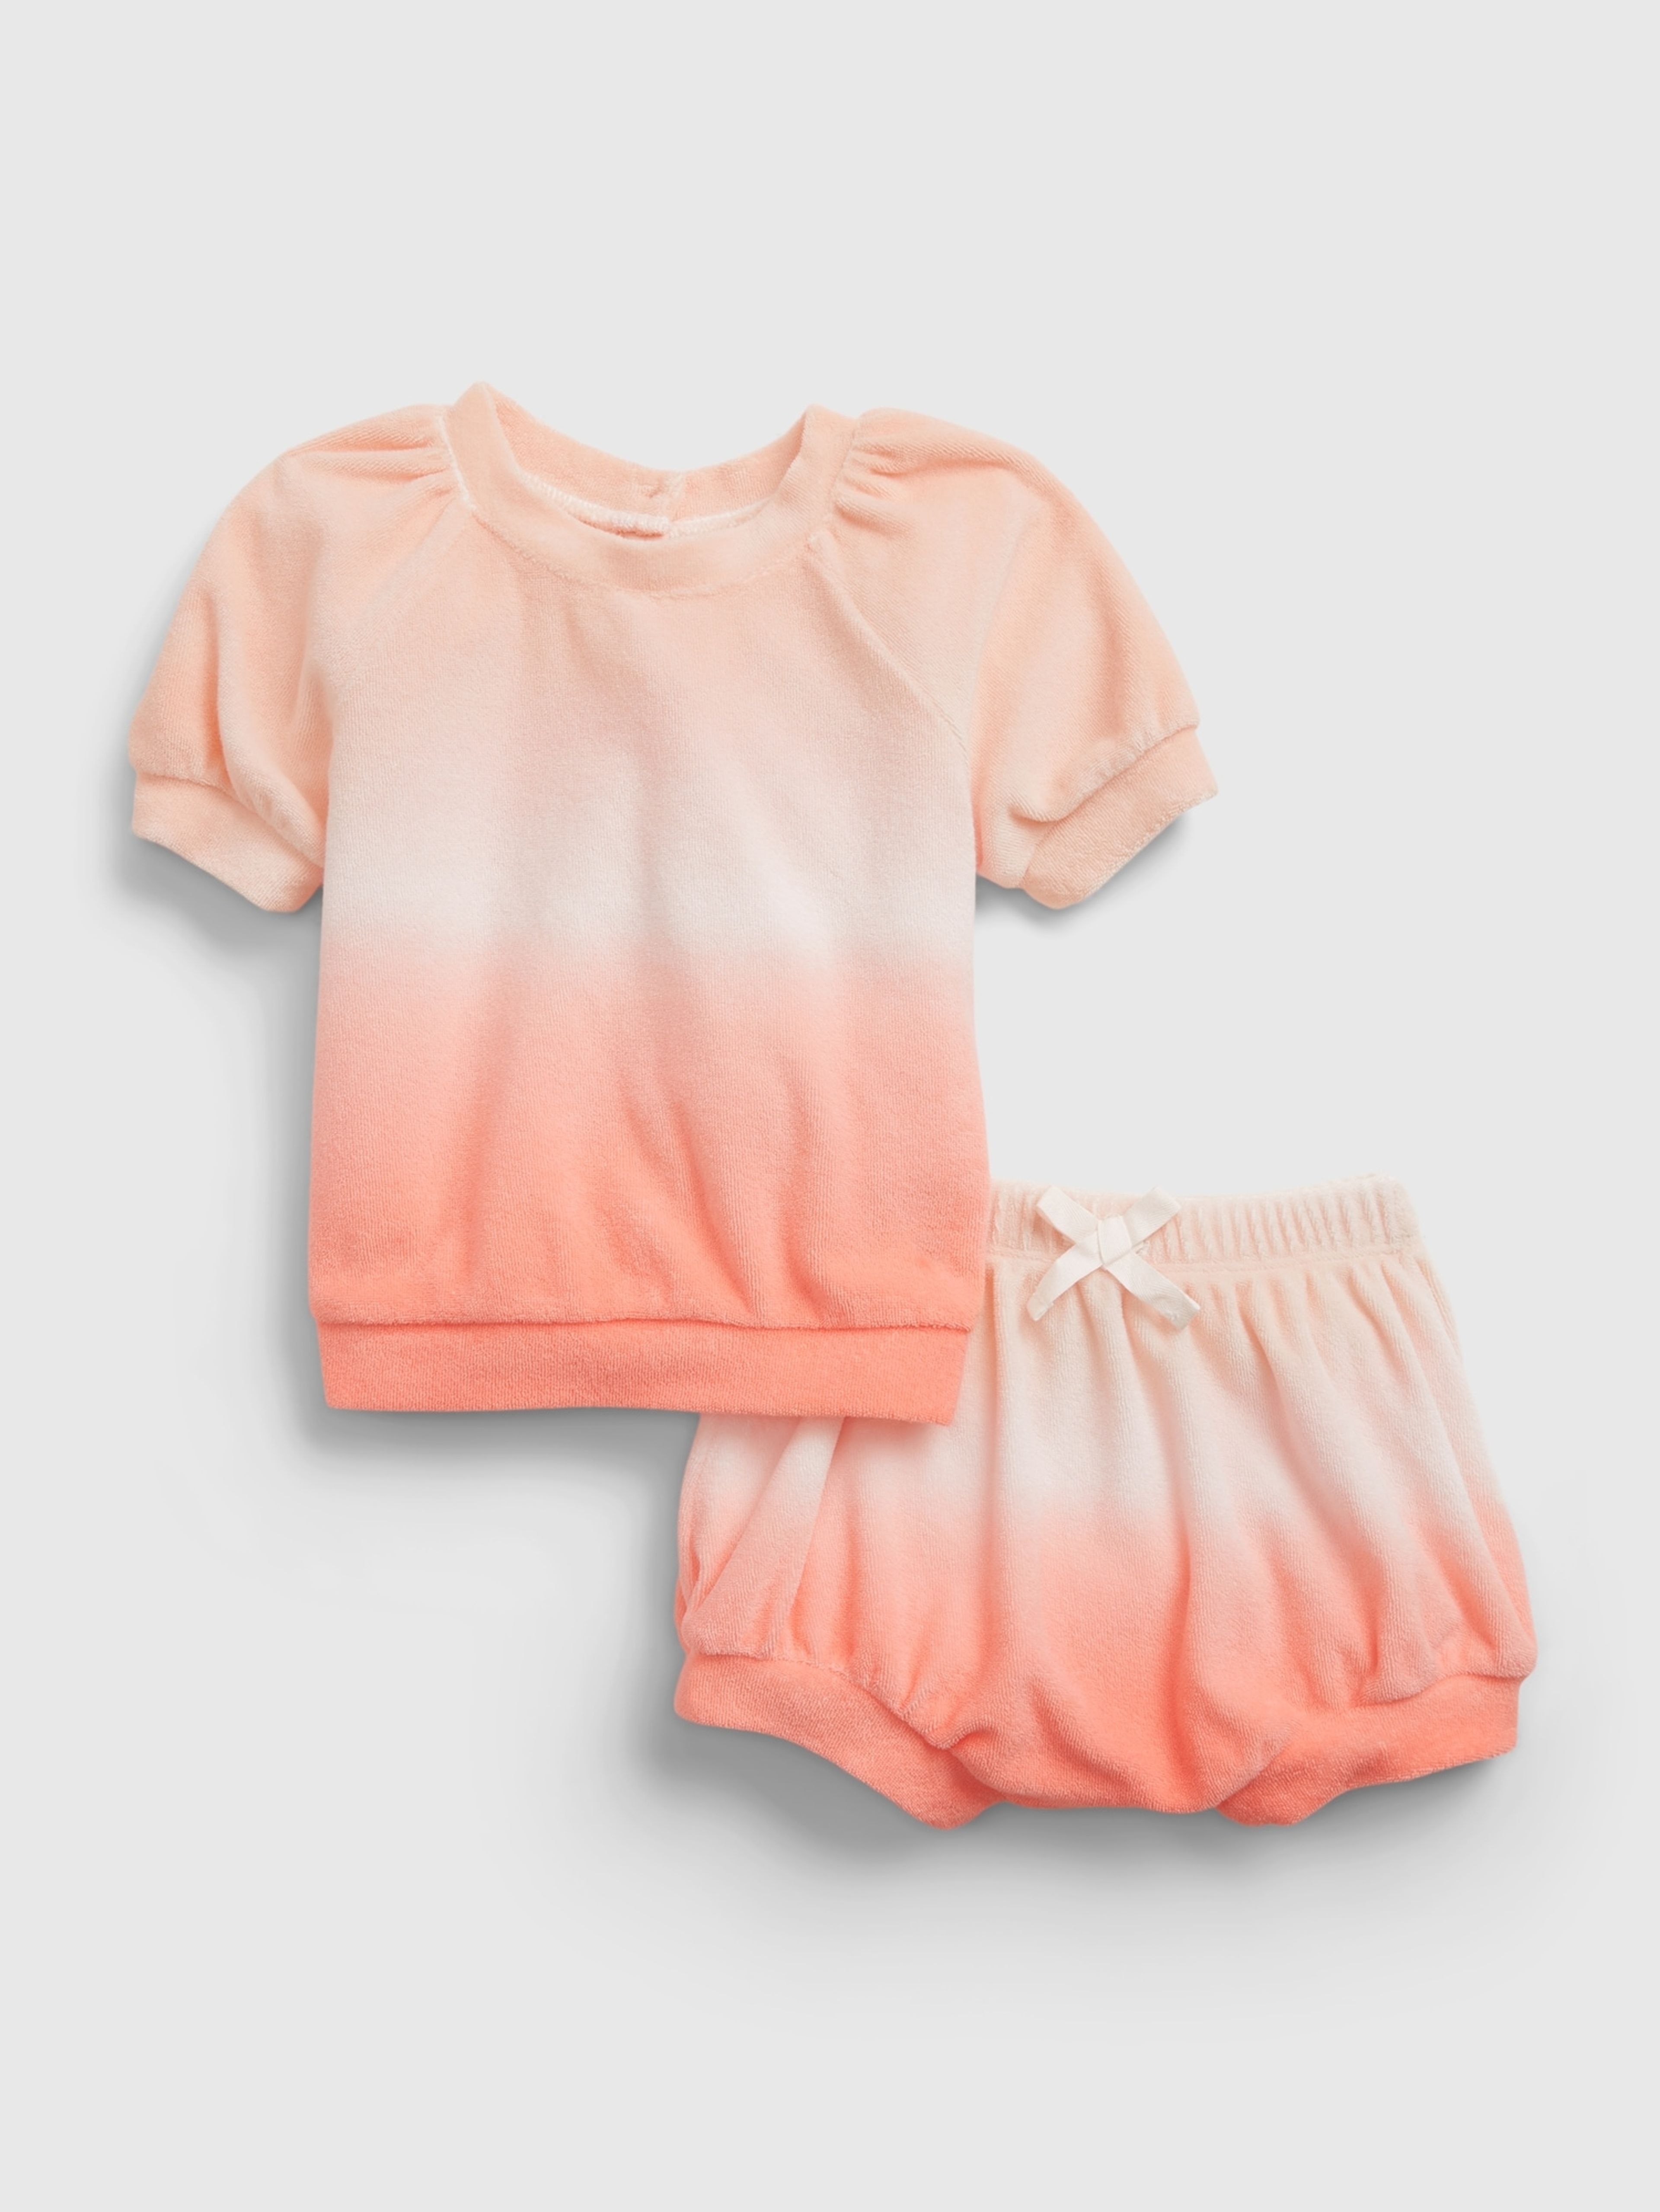 Baby set outfit